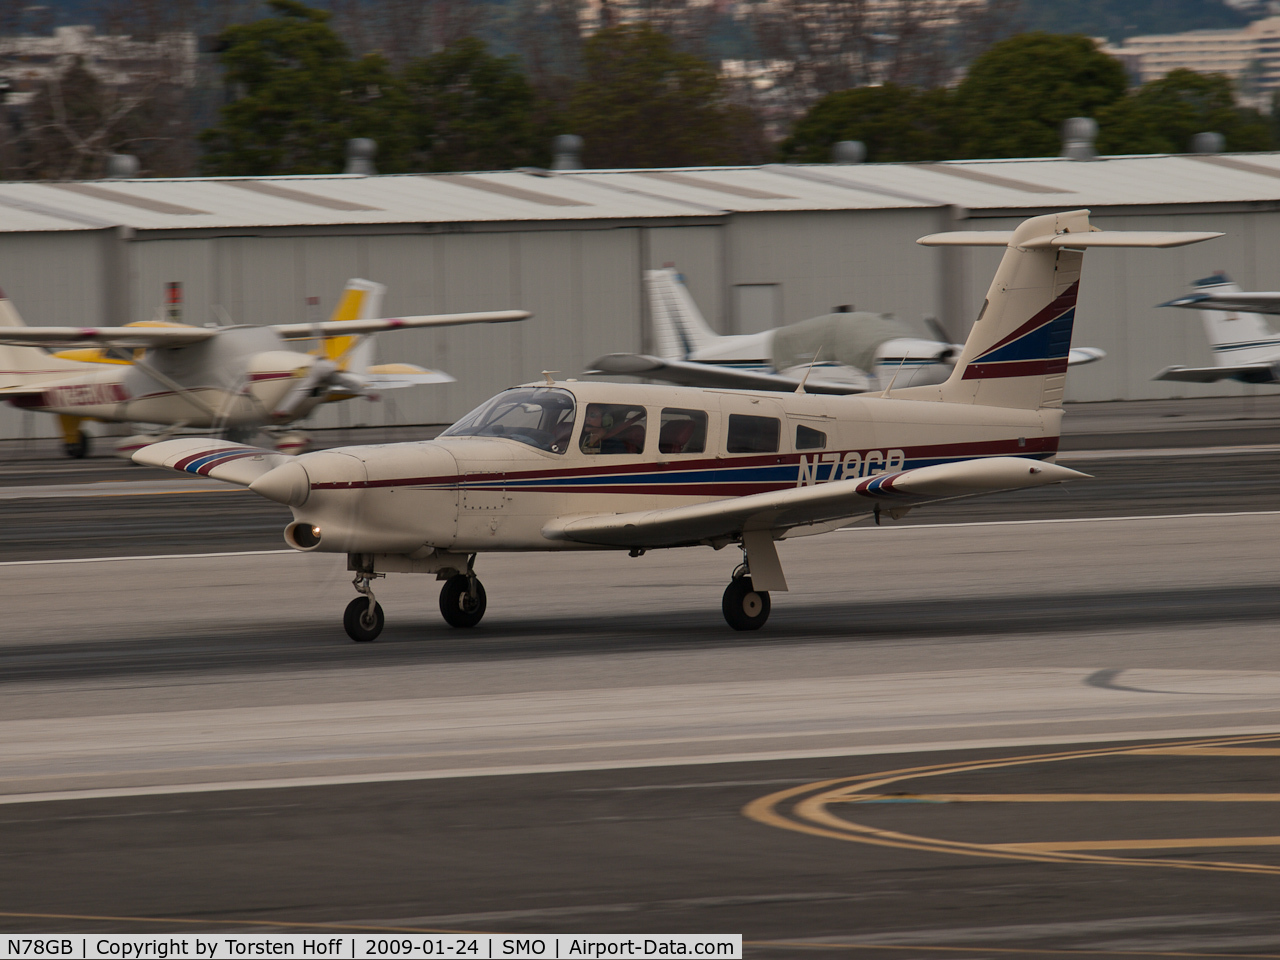 N78GB, 1978 Piper PA-32RT-300T Turbo Lance II C/N 32R-7887282, N78GB departing from RWY 21